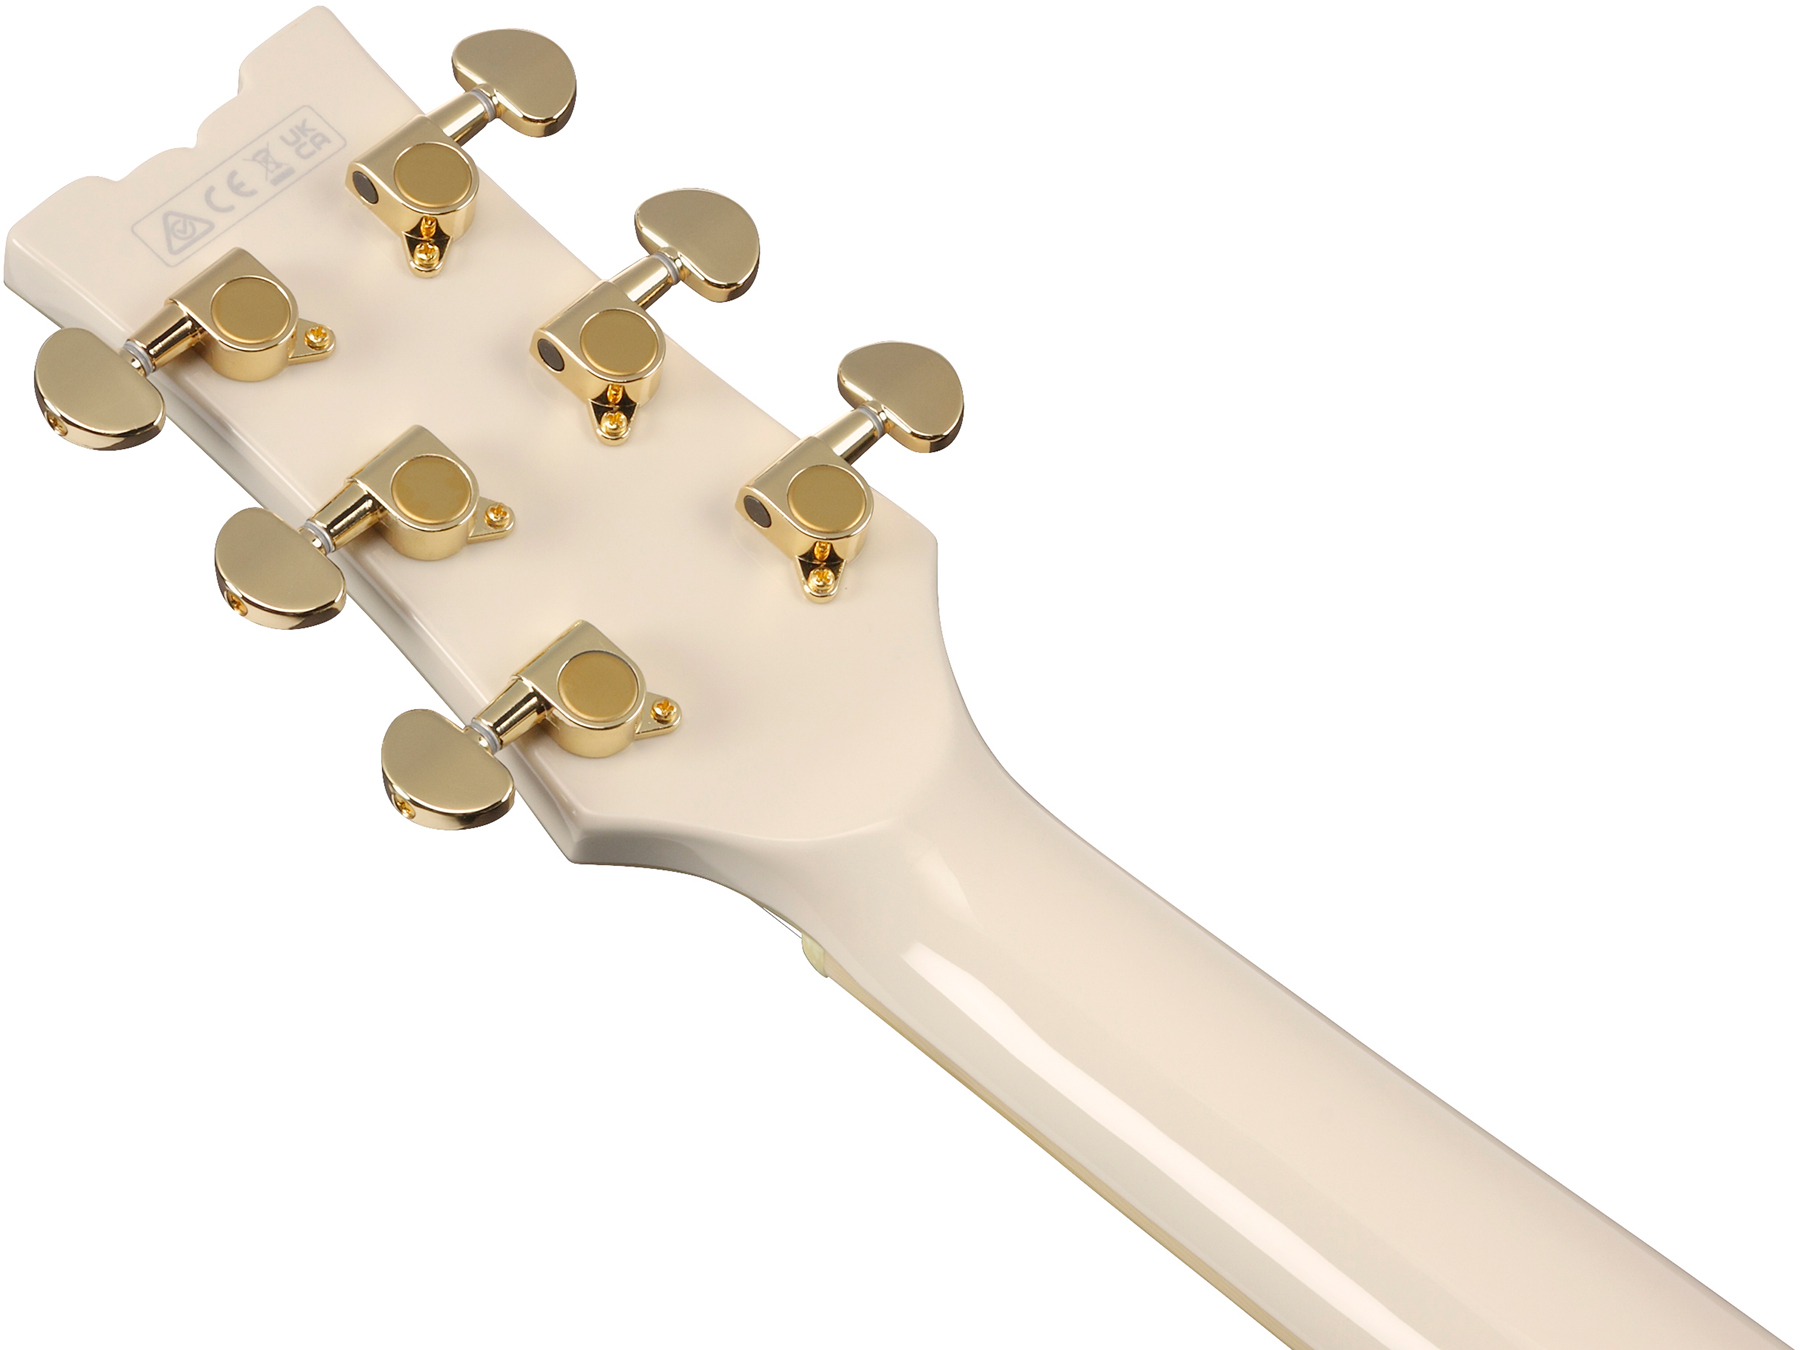 Ibanez Amh90 Iv Artcore Expressionist 2h Ht Eb - Ivory - Hollow-body electric guitar - Variation 4